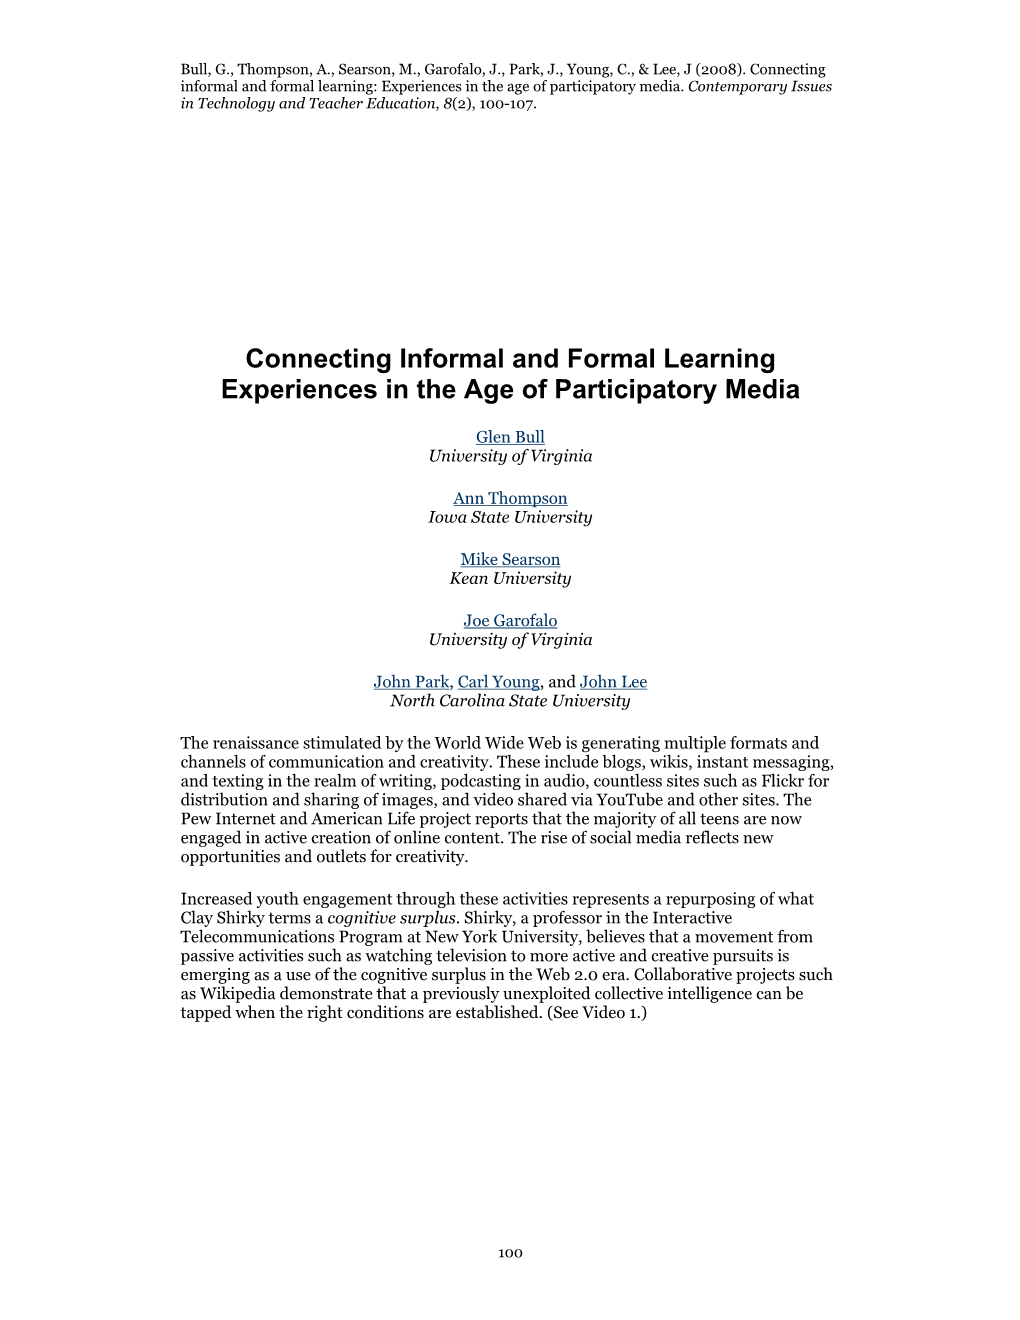 Connecting Informal and Formal Learning Experiences in the Age of Participatory Media